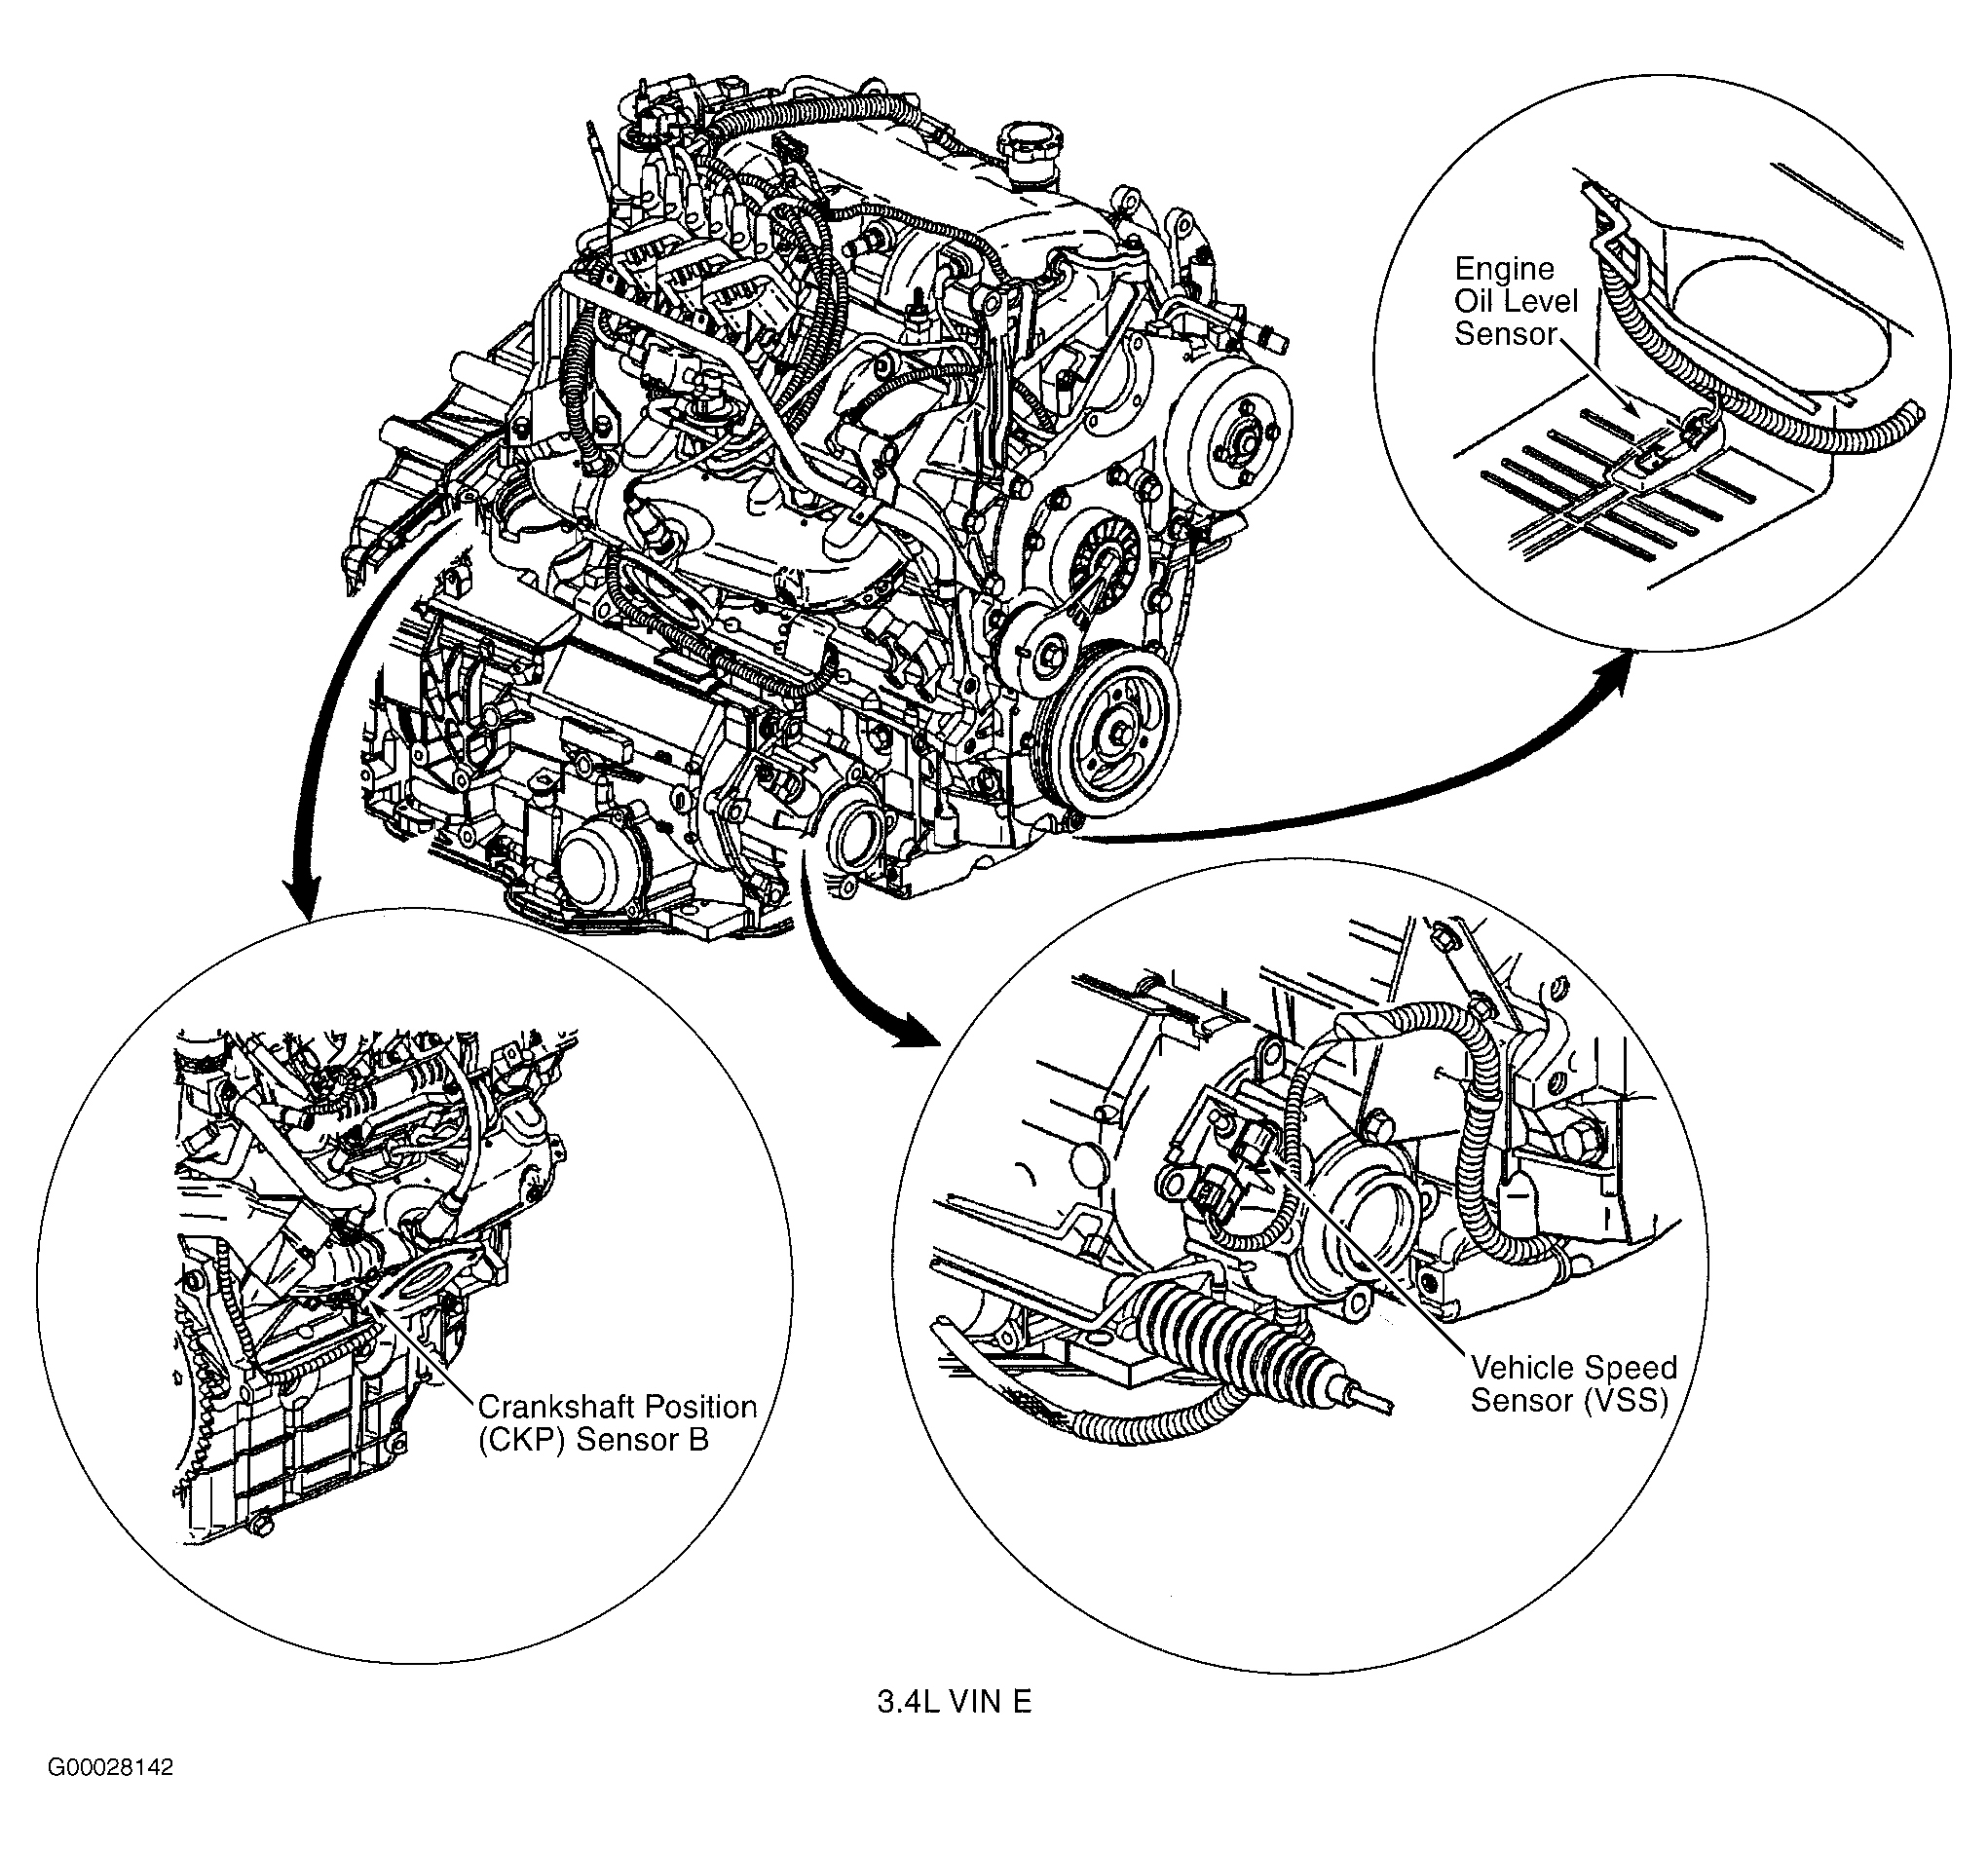 Chevrolet Impala LS 2003 - Component Locations -  Right Side Of Engine (3.4L VIN E)